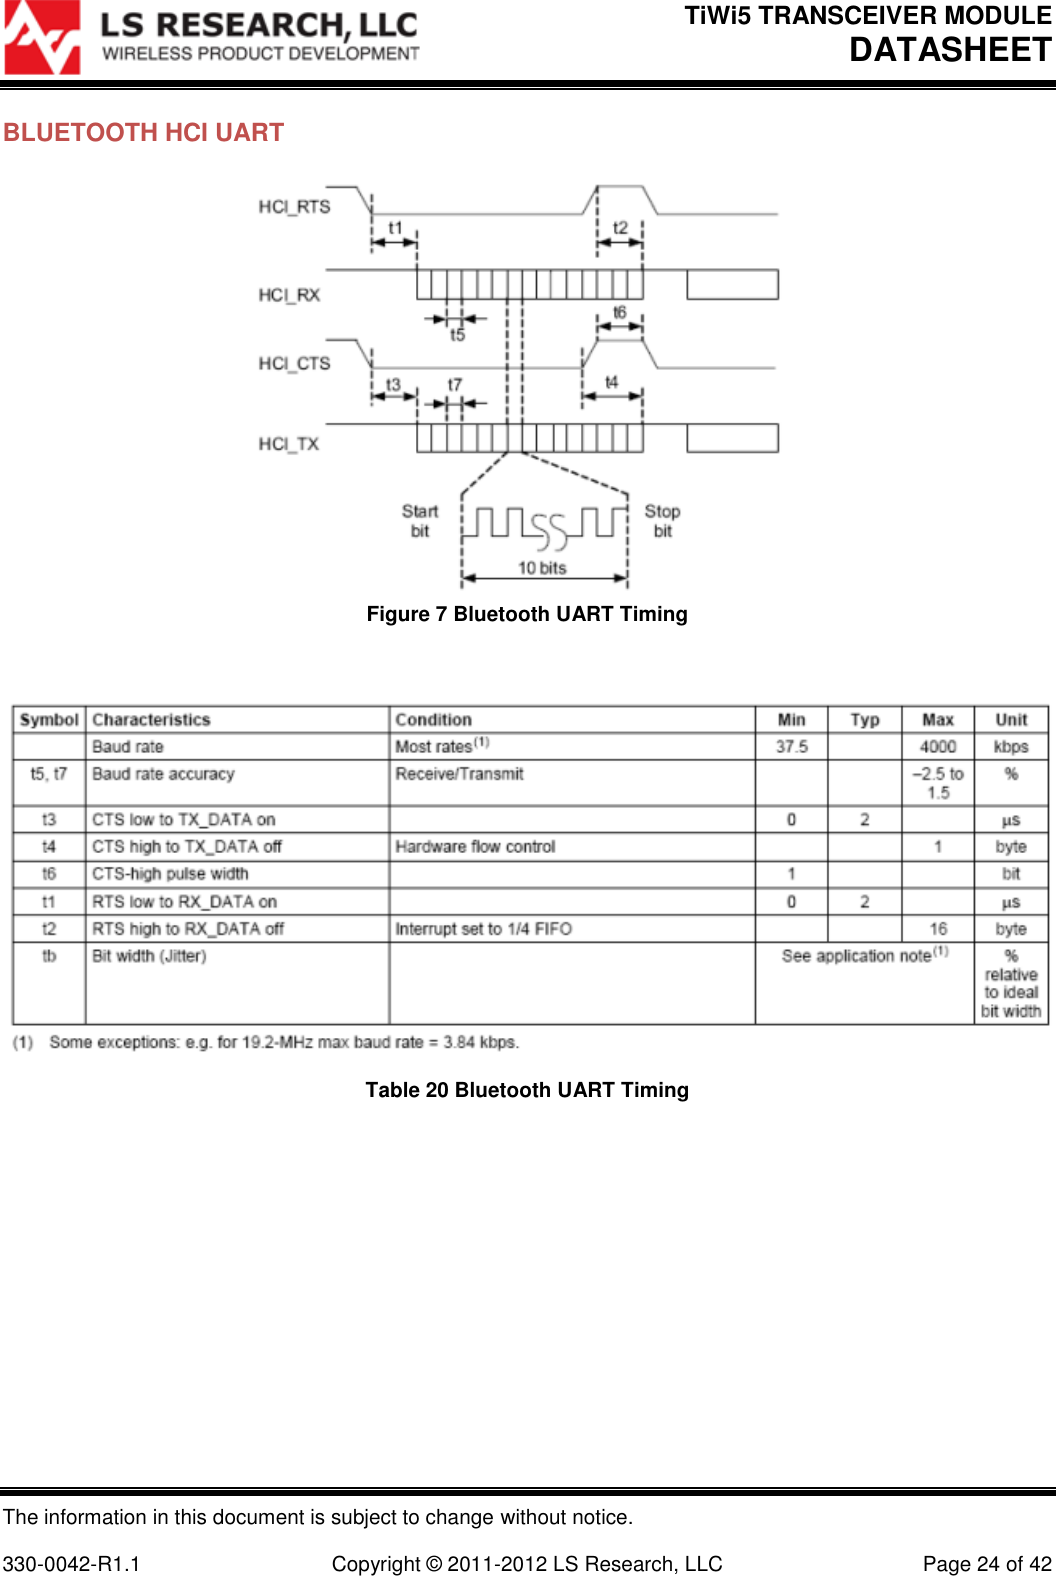 TiWi5 TRANSCEIVER MODULE DATASHEET  The information in this document is subject to change without notice.  330-0042-R1.1    Copyright © 2011-2012 LS Research, LLC  Page 24 of 42 BLUETOOTH HCI UART  Figure 7 Bluetooth UART Timing   Table 20 Bluetooth UART Timing     